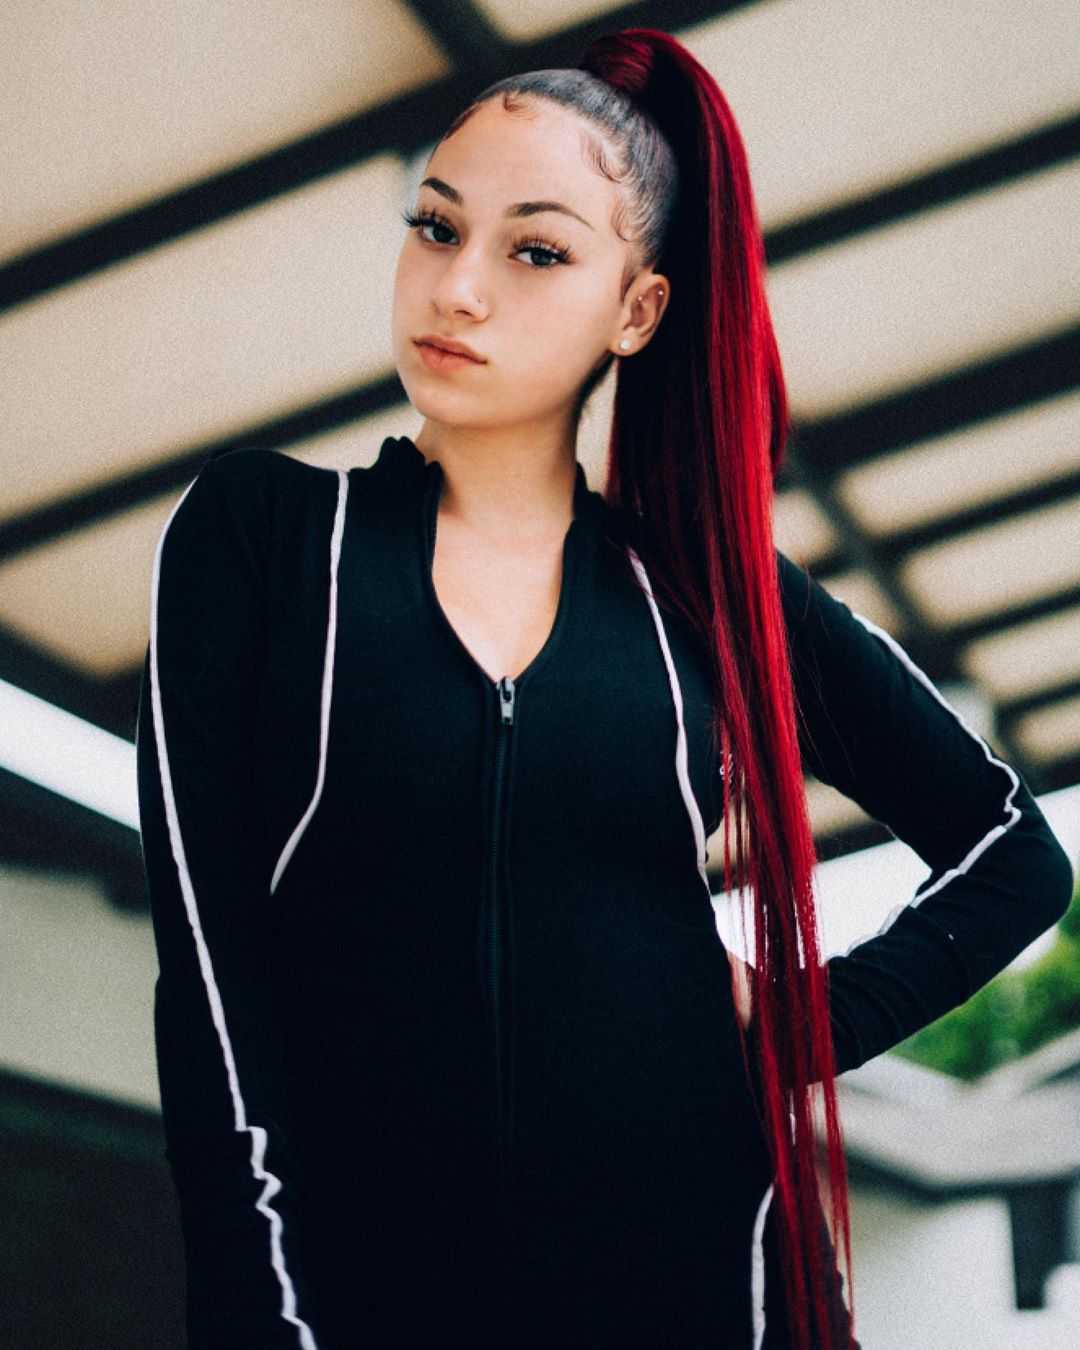 60+ Sexy Danielle Bregoli a.k.a Bhad Bhabie Boobs Pictures Will Bring A Big Smile On Your Face | Best Of Comic Books